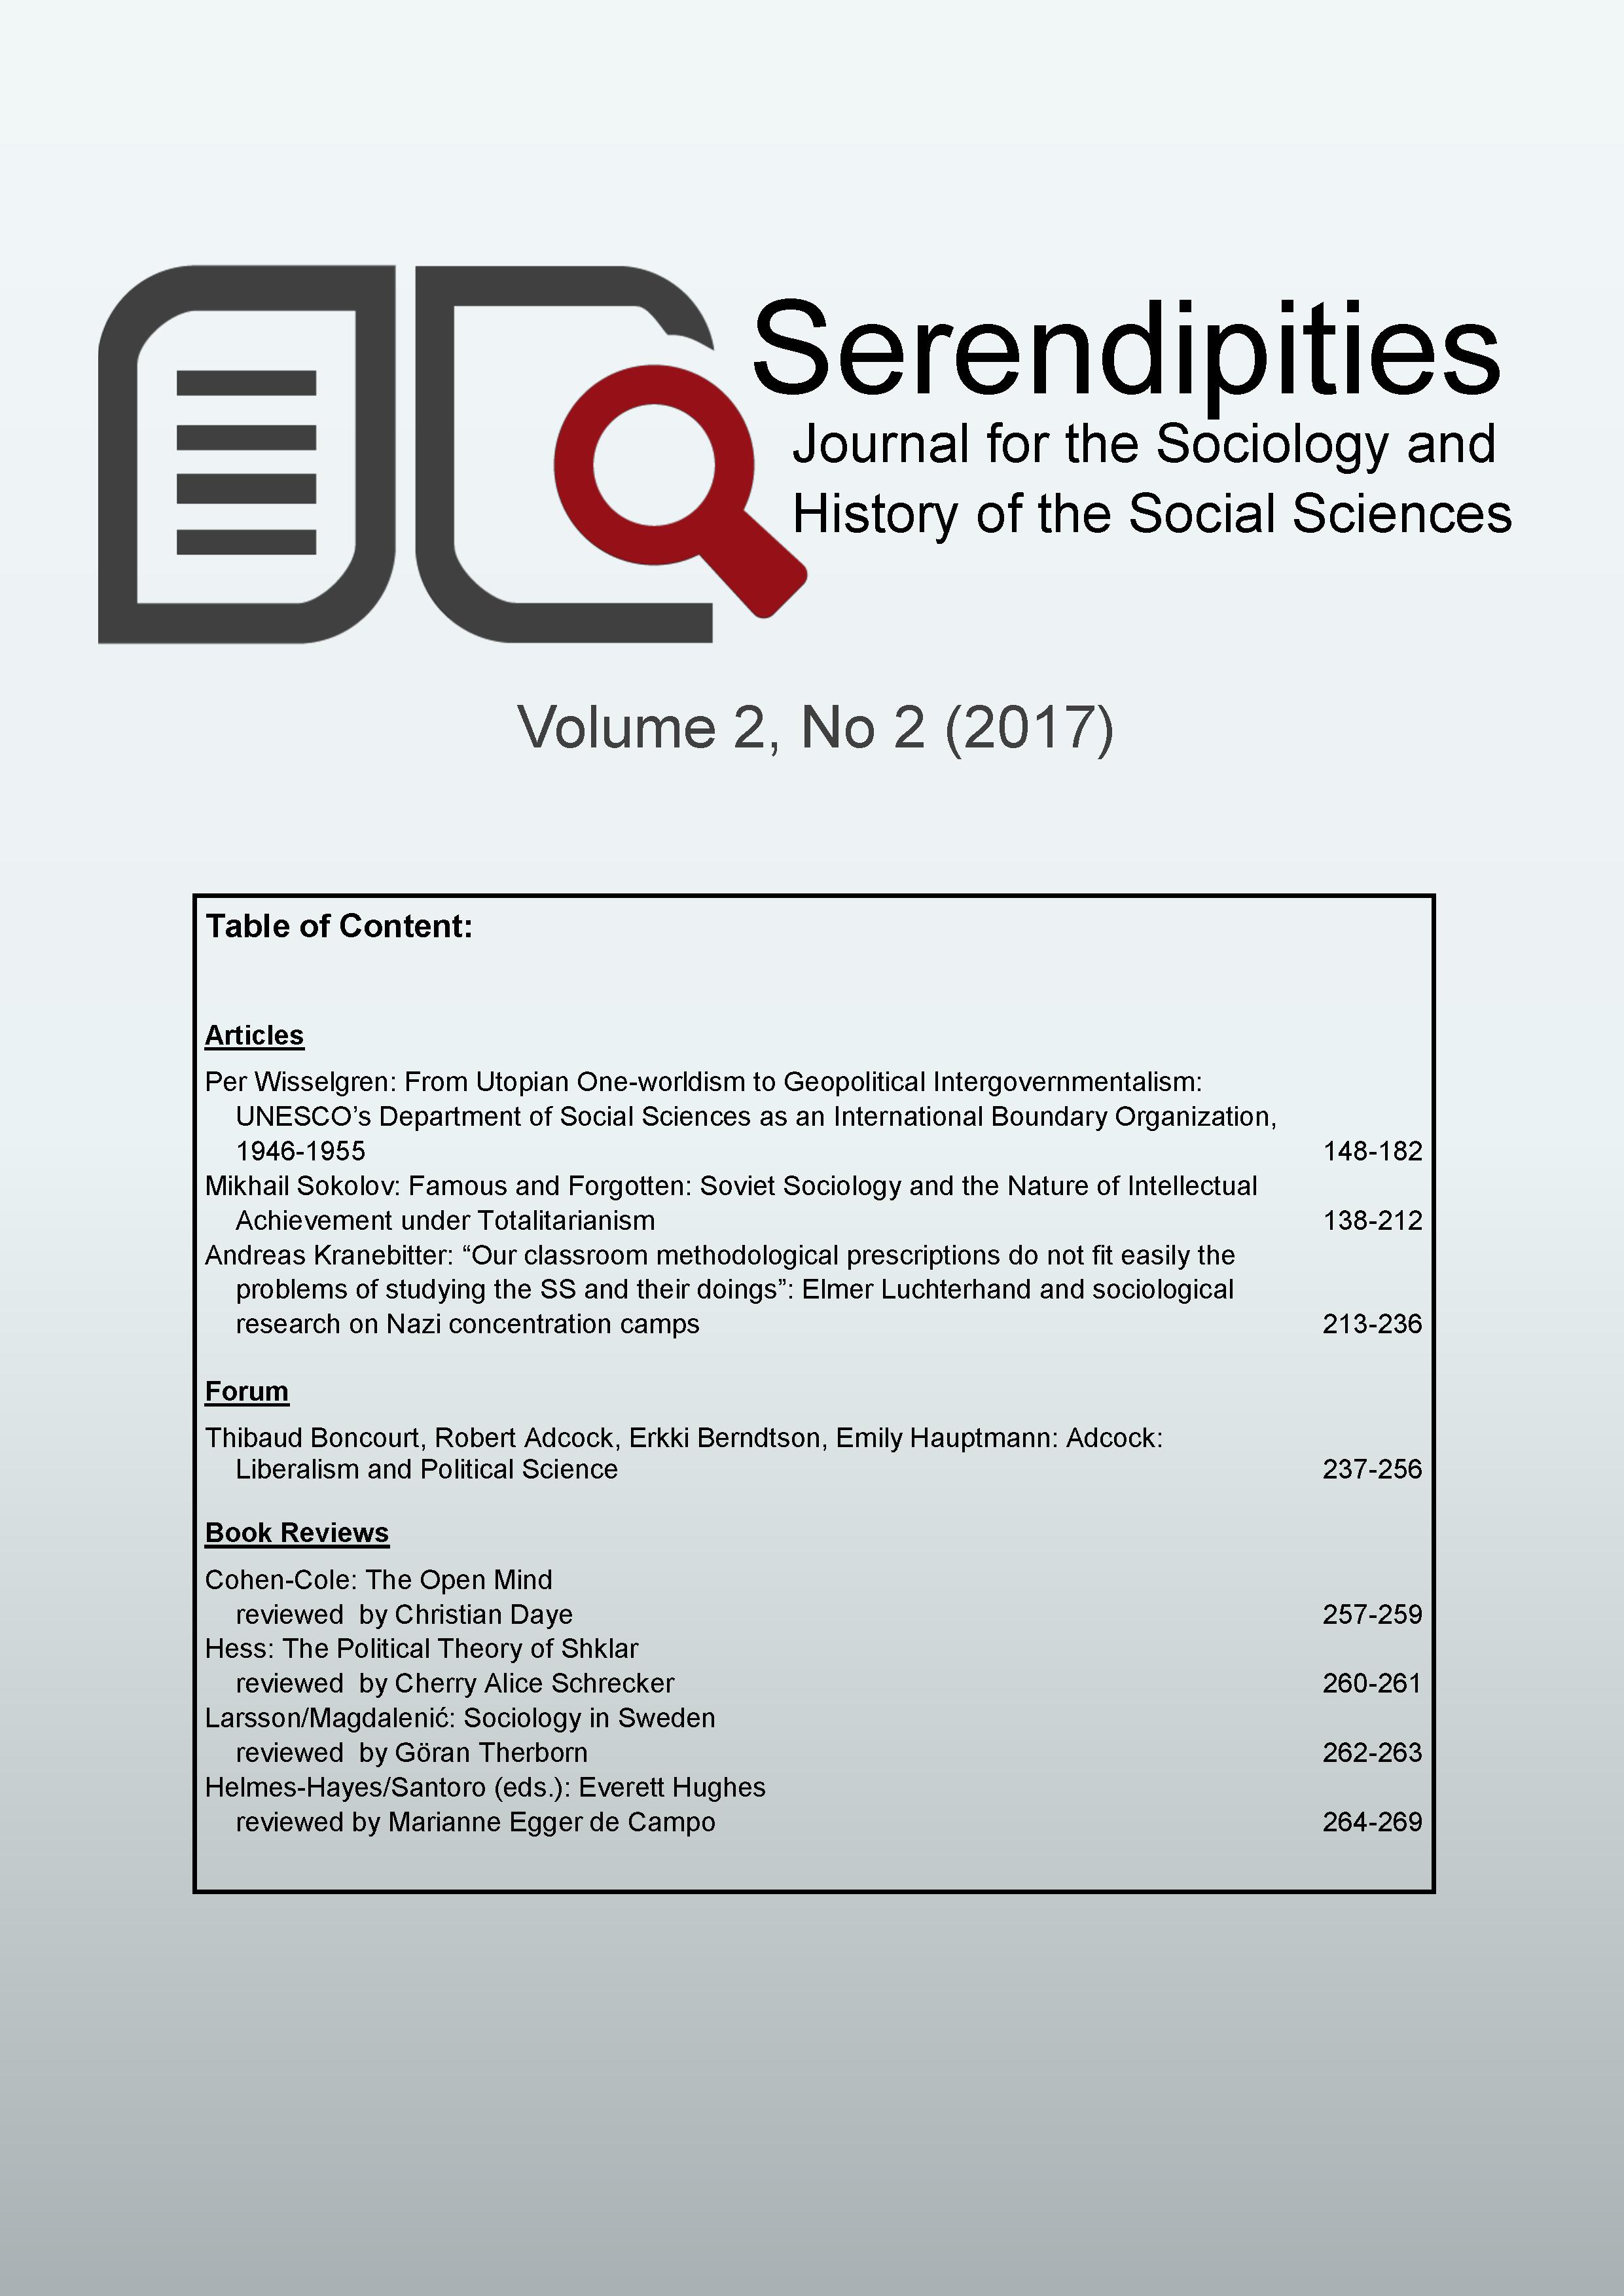 					View Vol. 2 No. 2 (2017): Serendipities. Journal for the Sociology and History of the Social Sciences
				